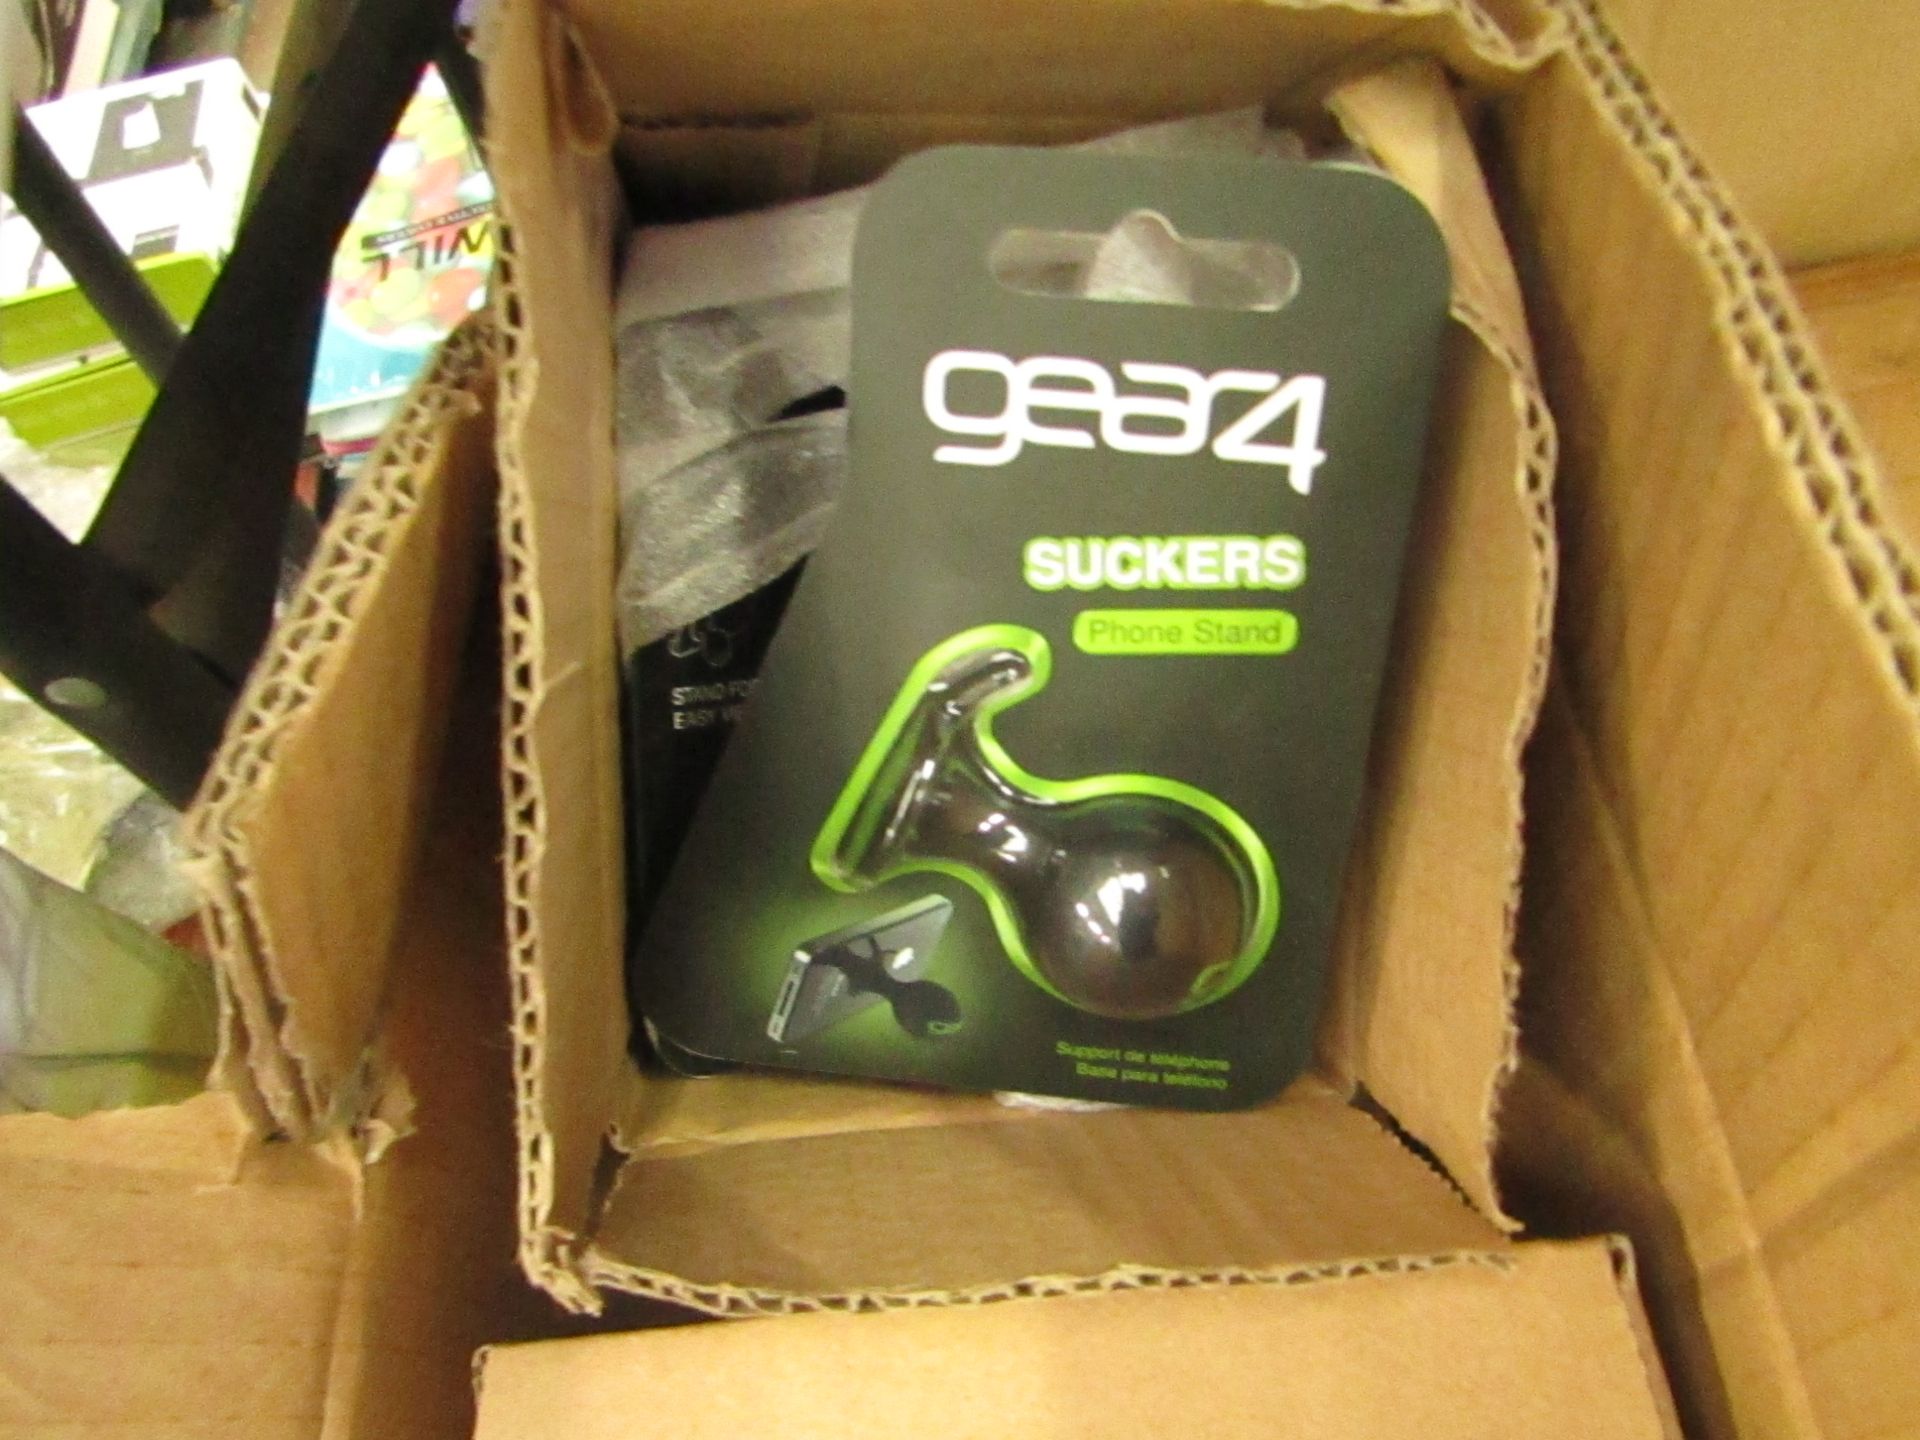 5x Gear4 - Phone Stand Suckers - Packaged and Boxed.